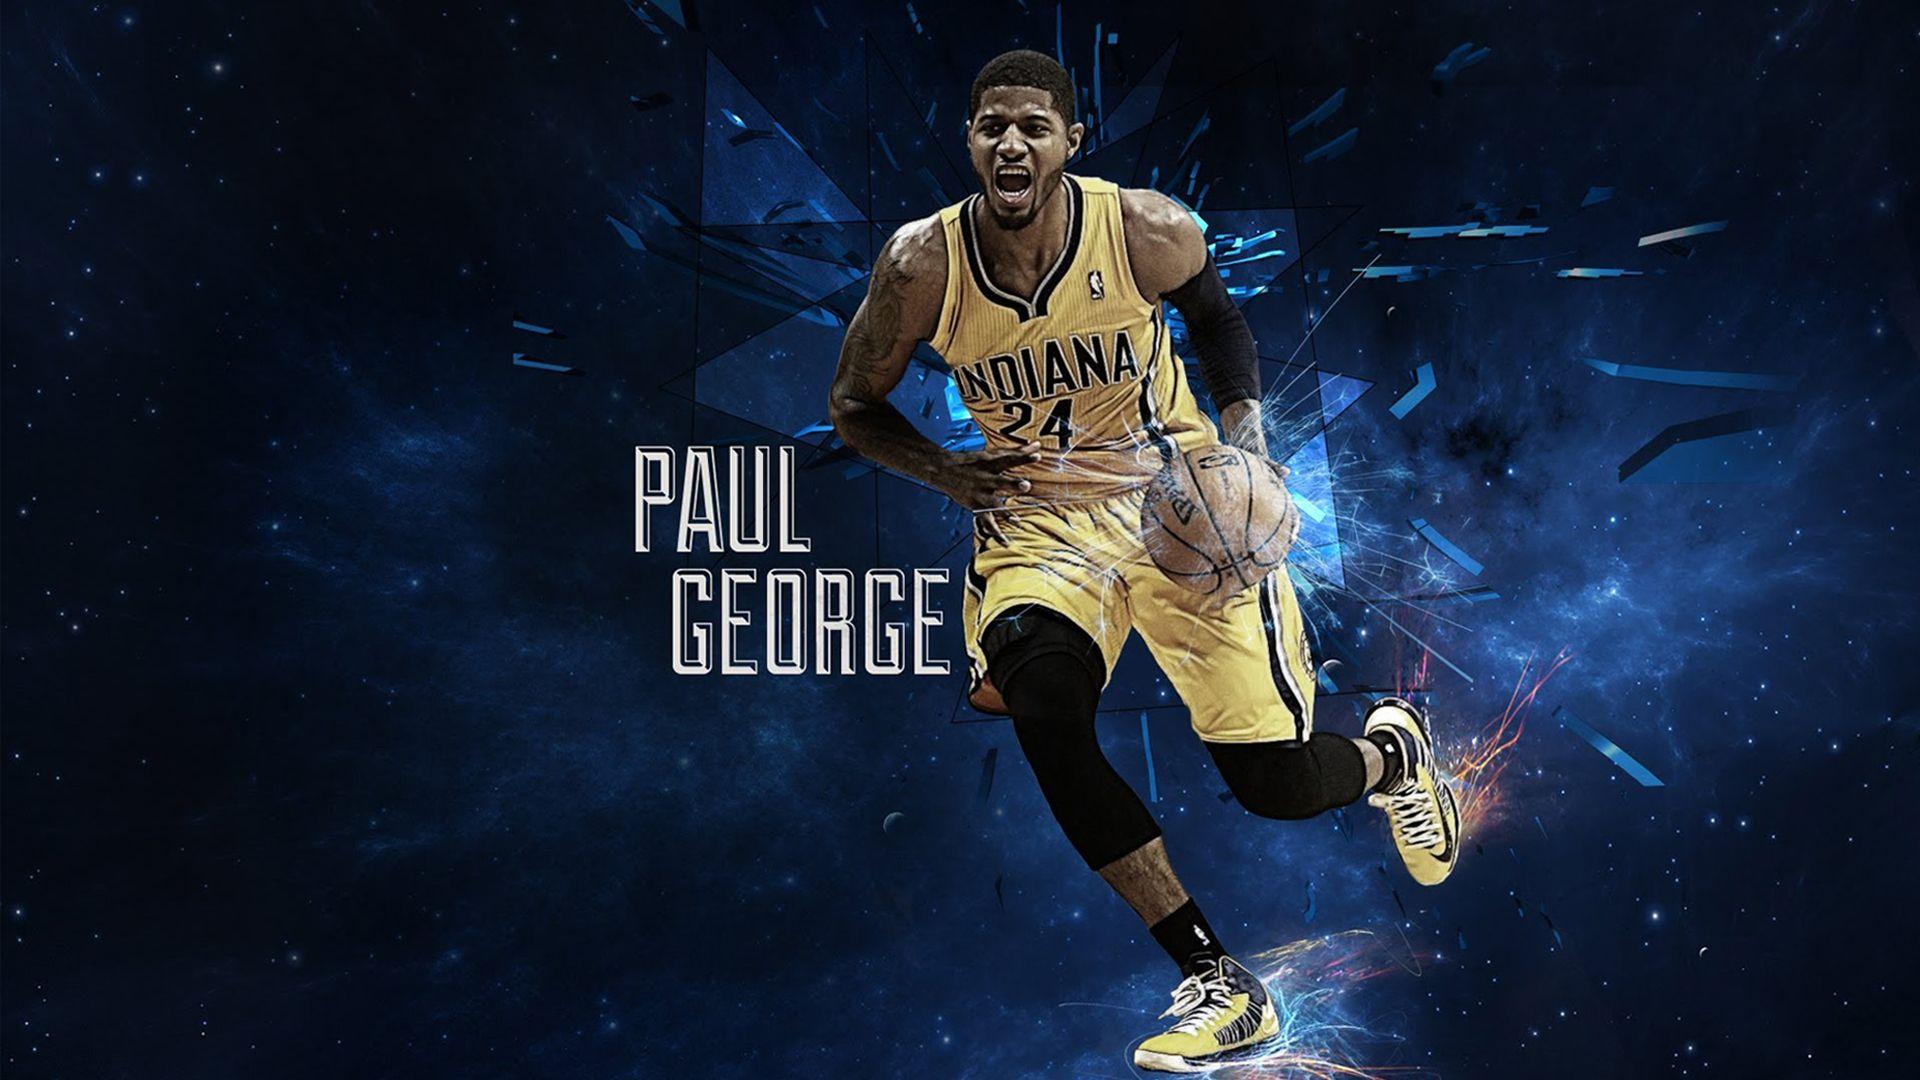 paul george indiana pacers nba players HD wallpaper free HD